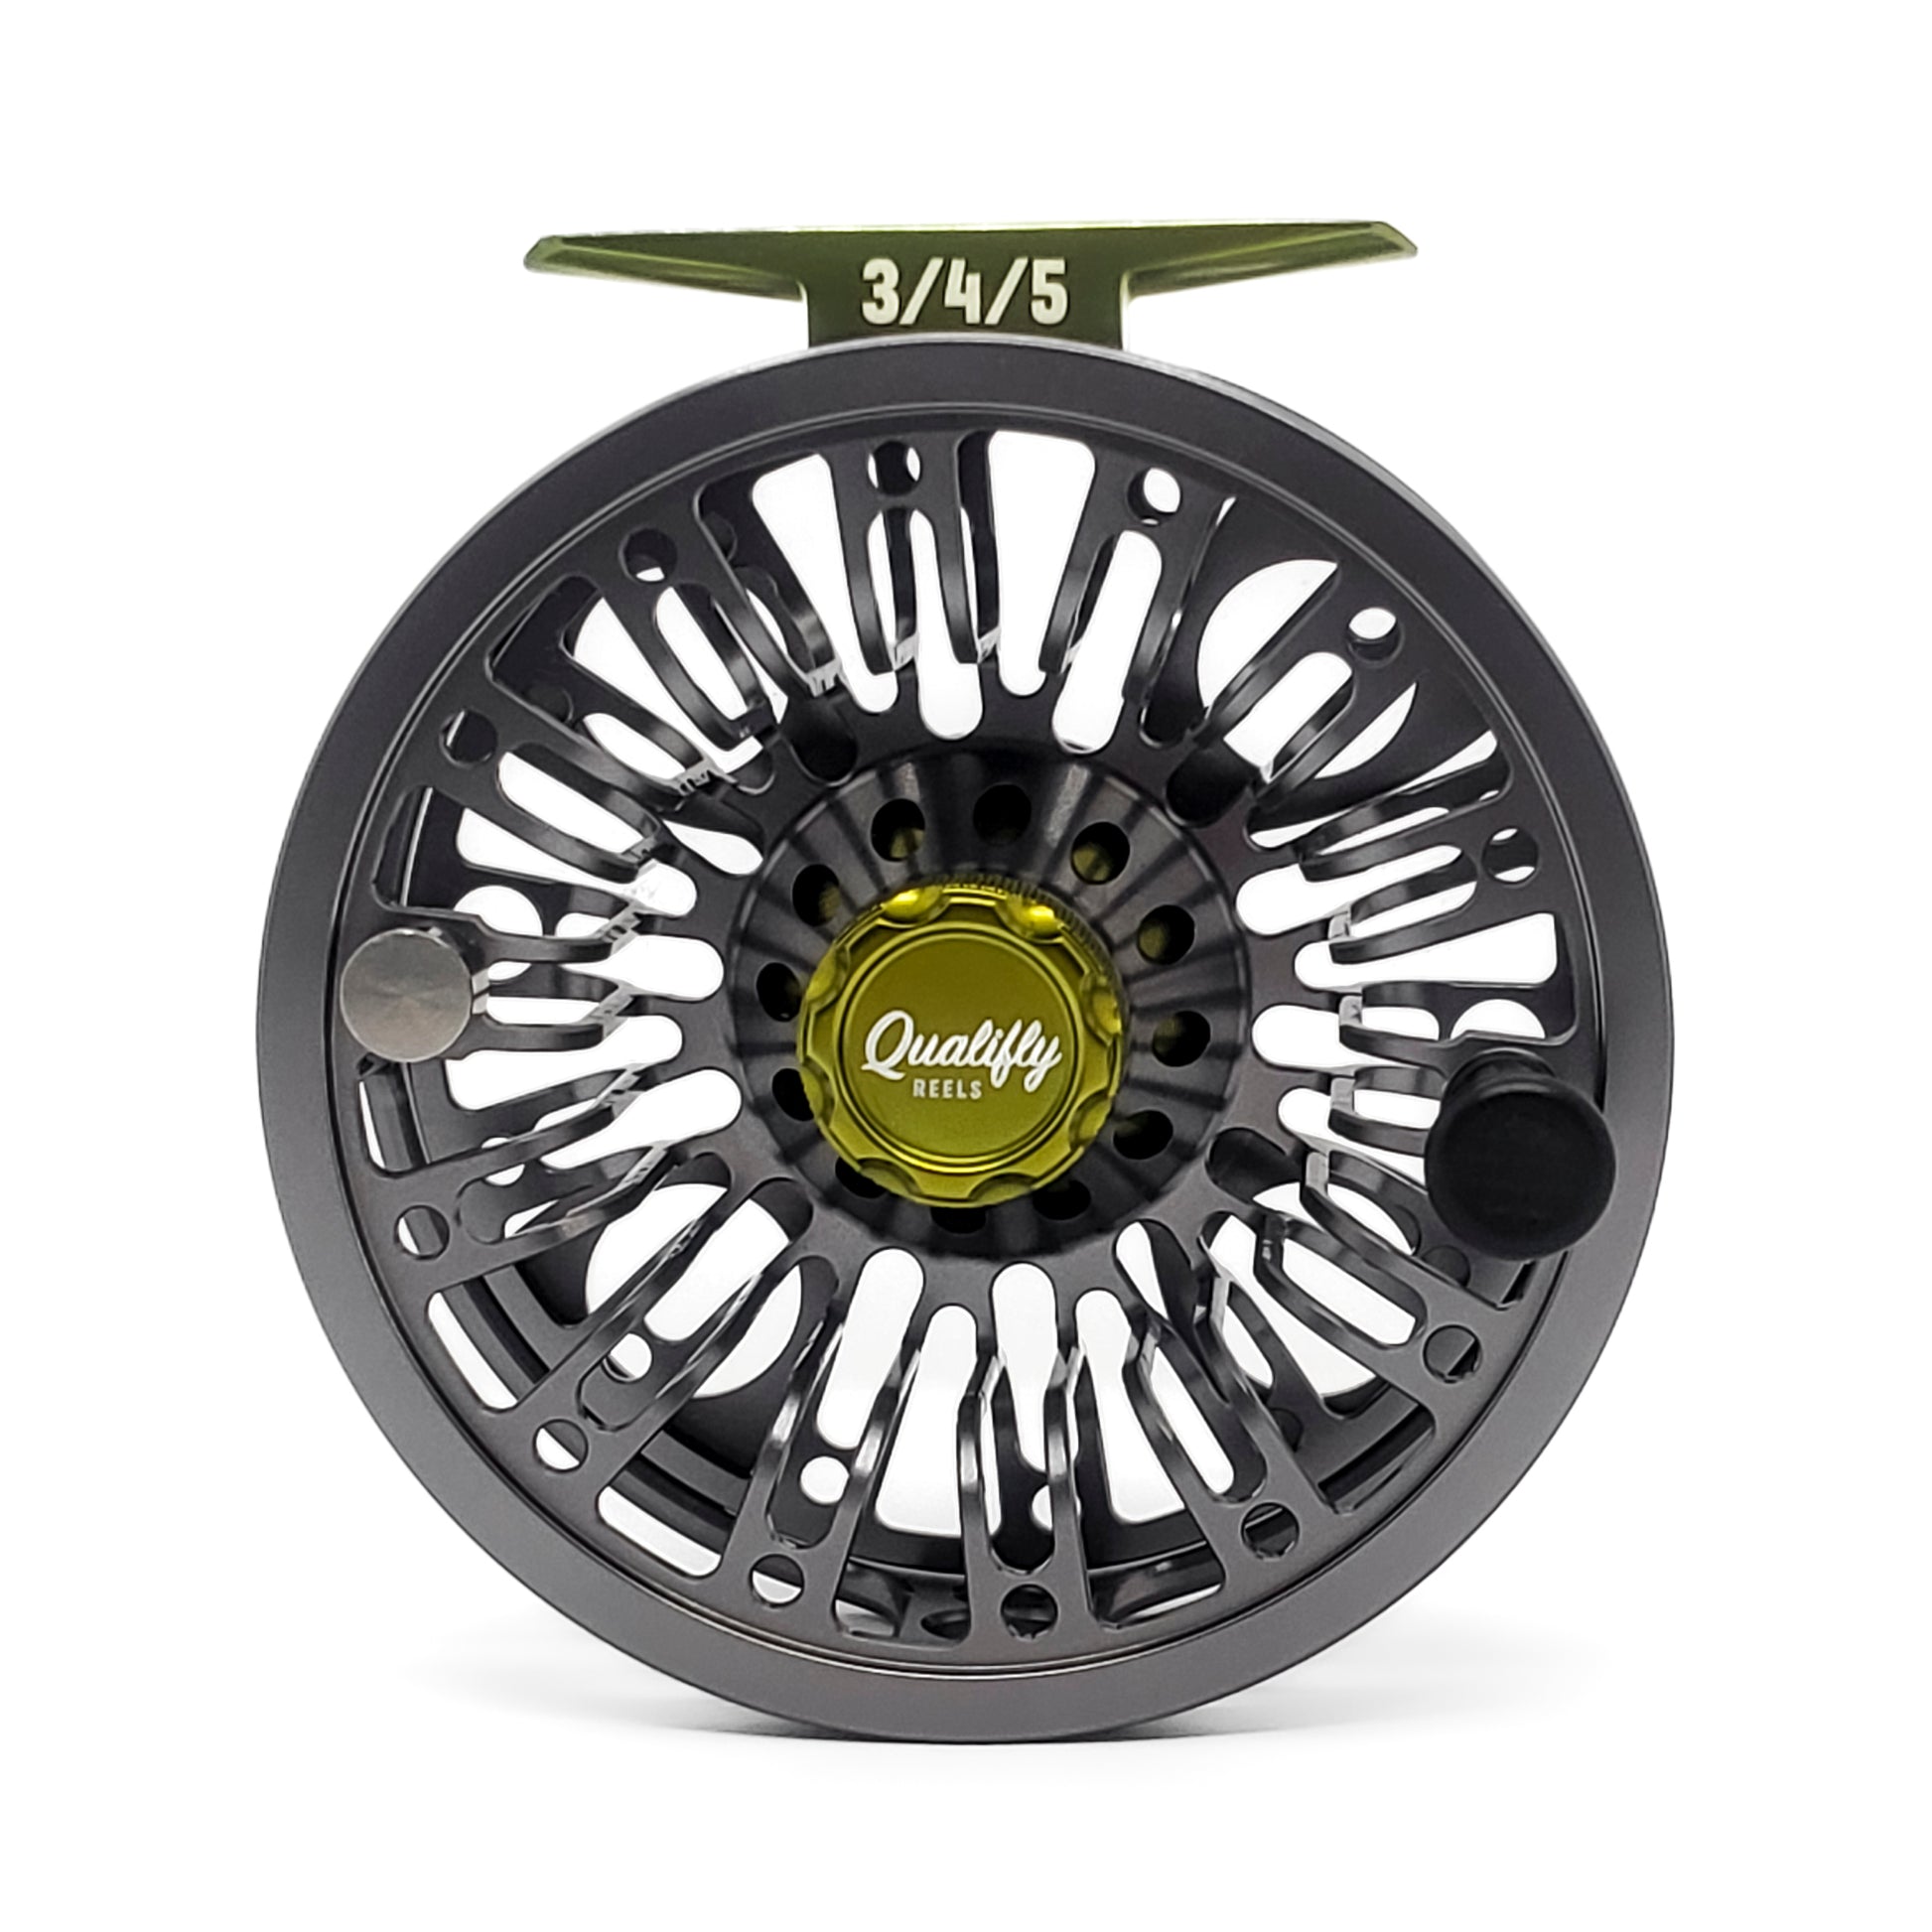 👀 Introducing the DRIFT, our 1st Full Frame Fly Reel for Euro